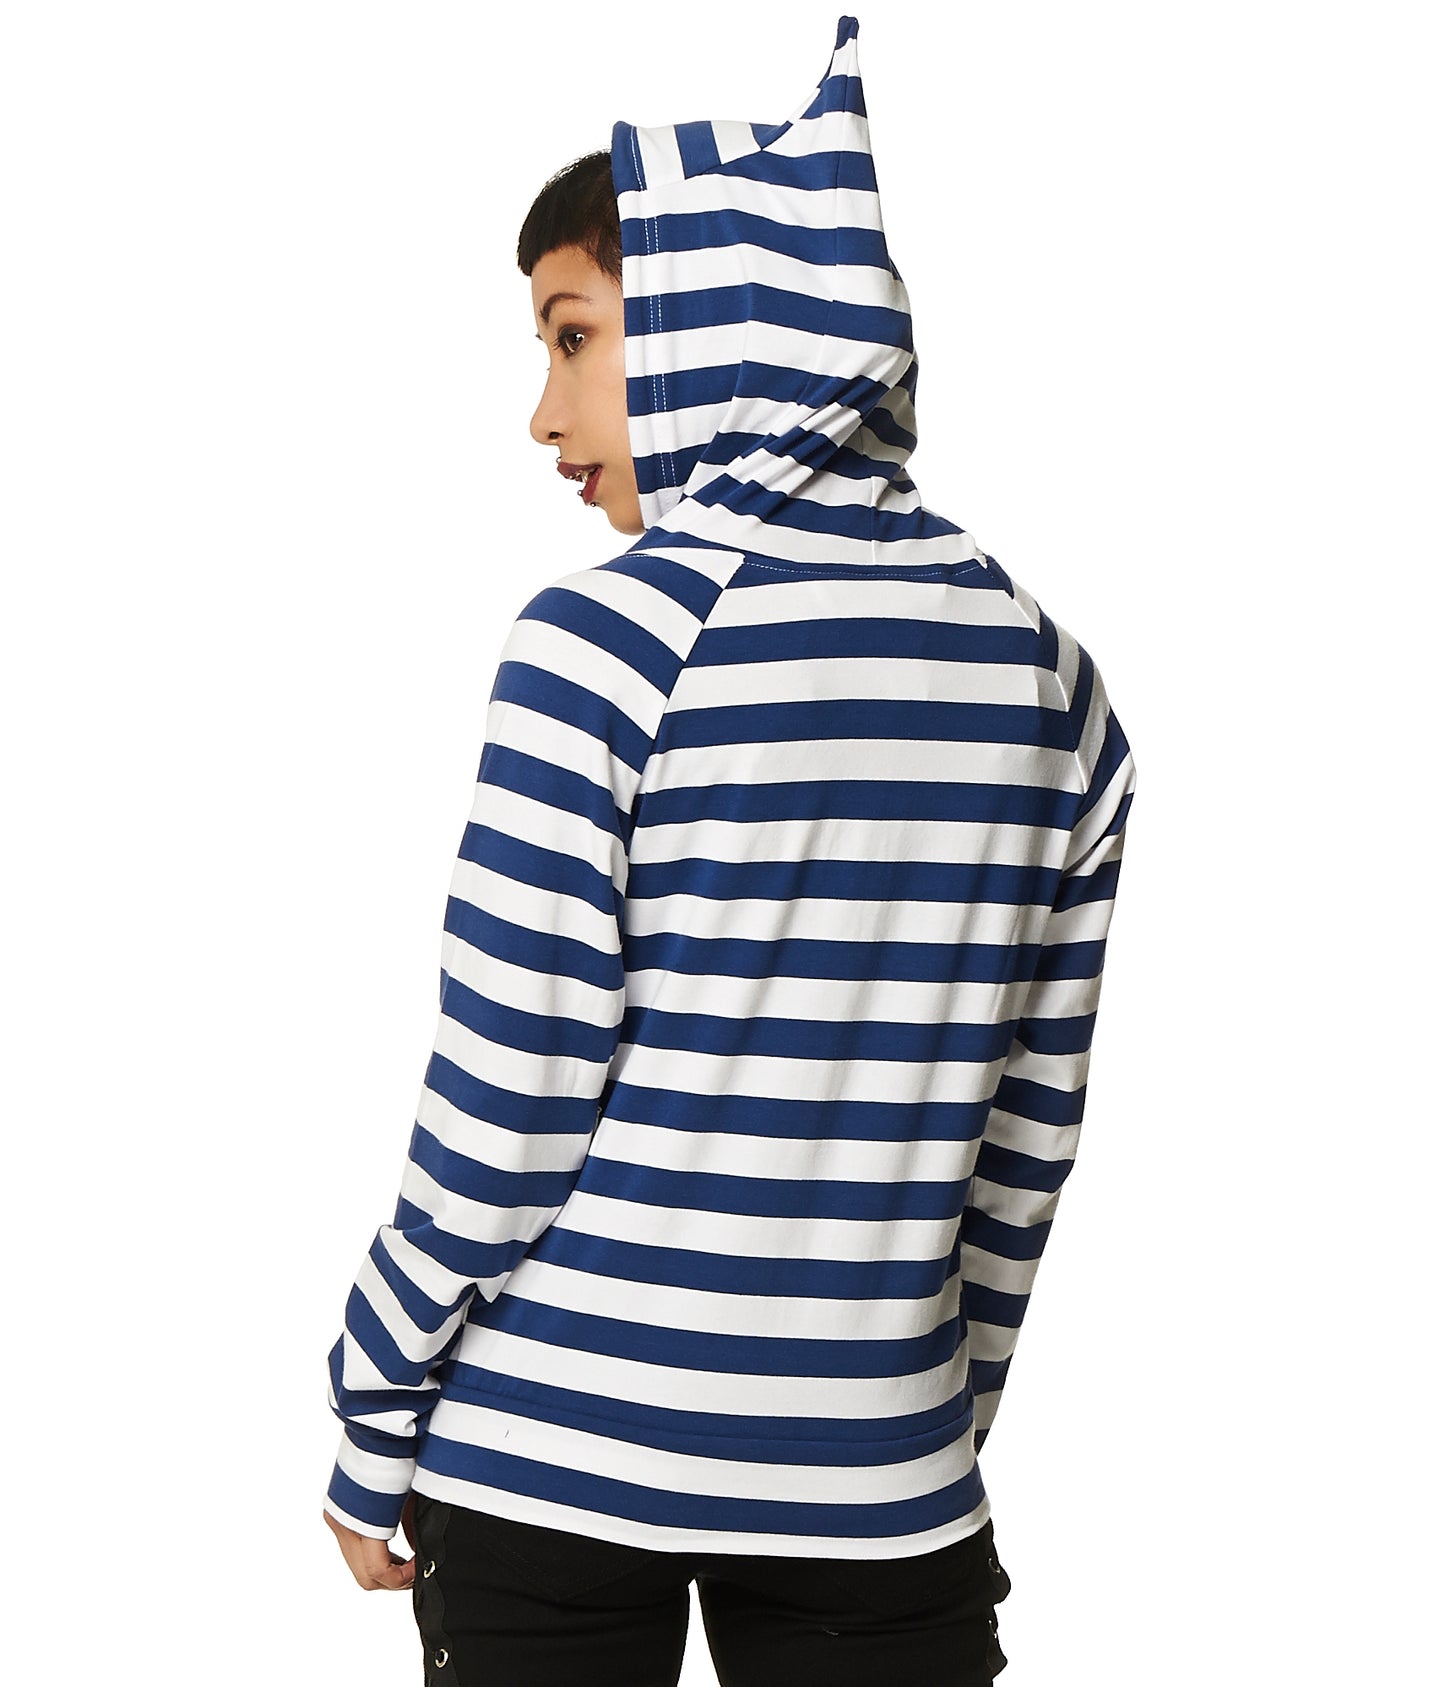 Model wearing a blue and white stripes zip up hoodie with cat ears on the hood and thumb holes in the sleeves